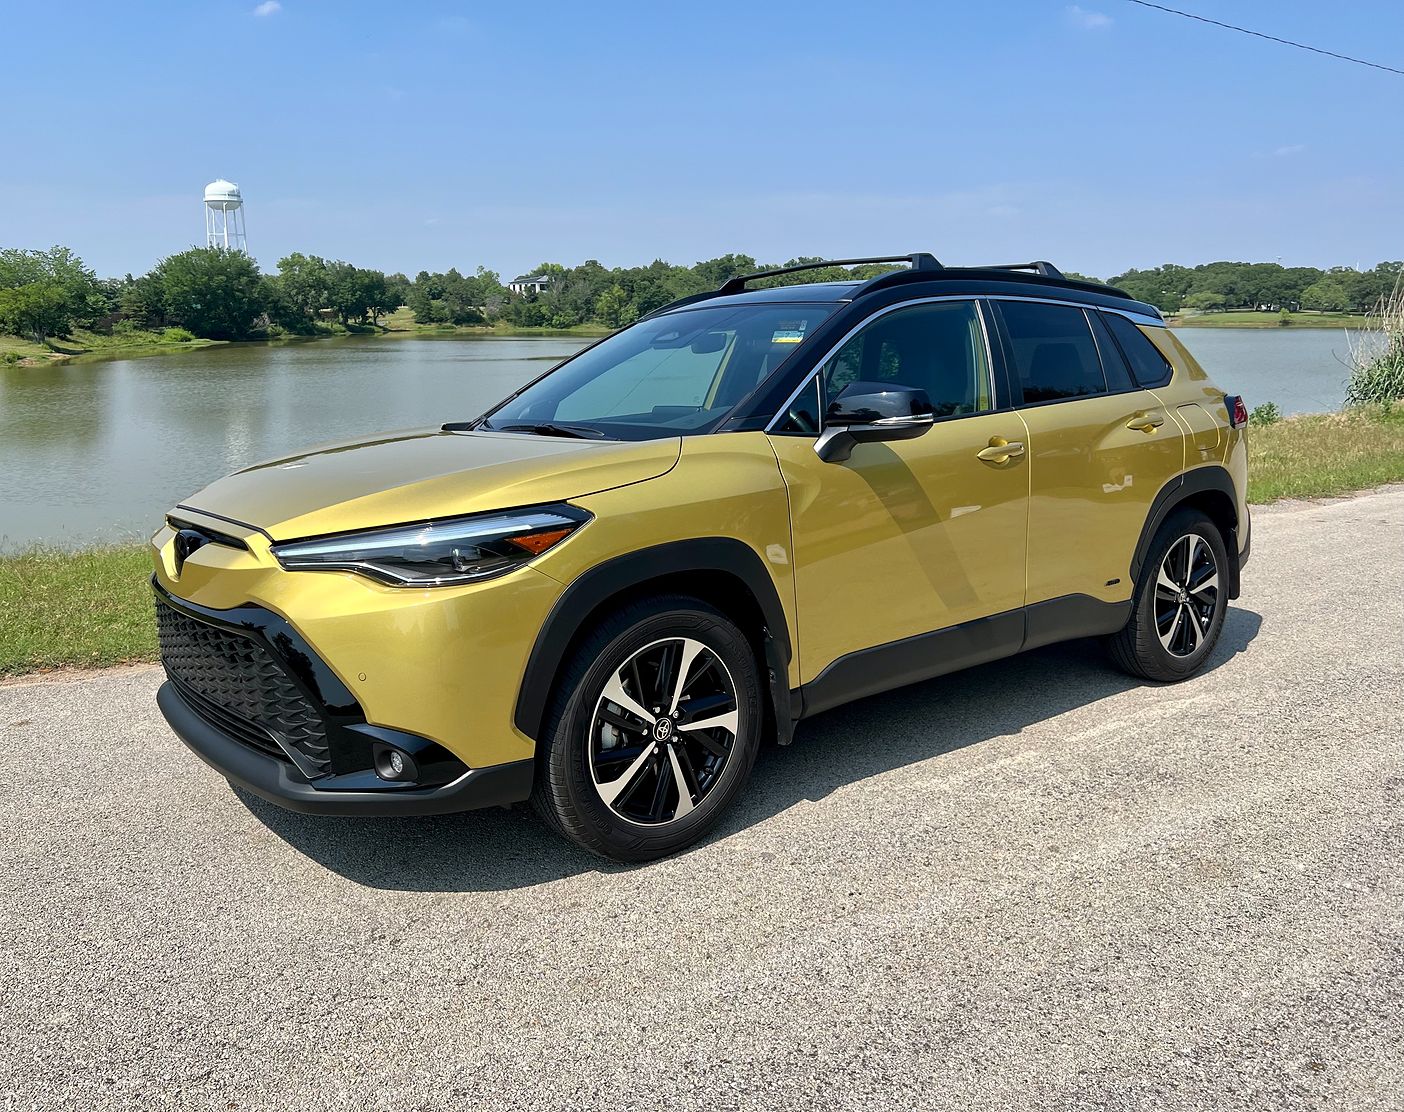 2022 Toyota Corolla Cross: A Famous Name Takes On The Crossover